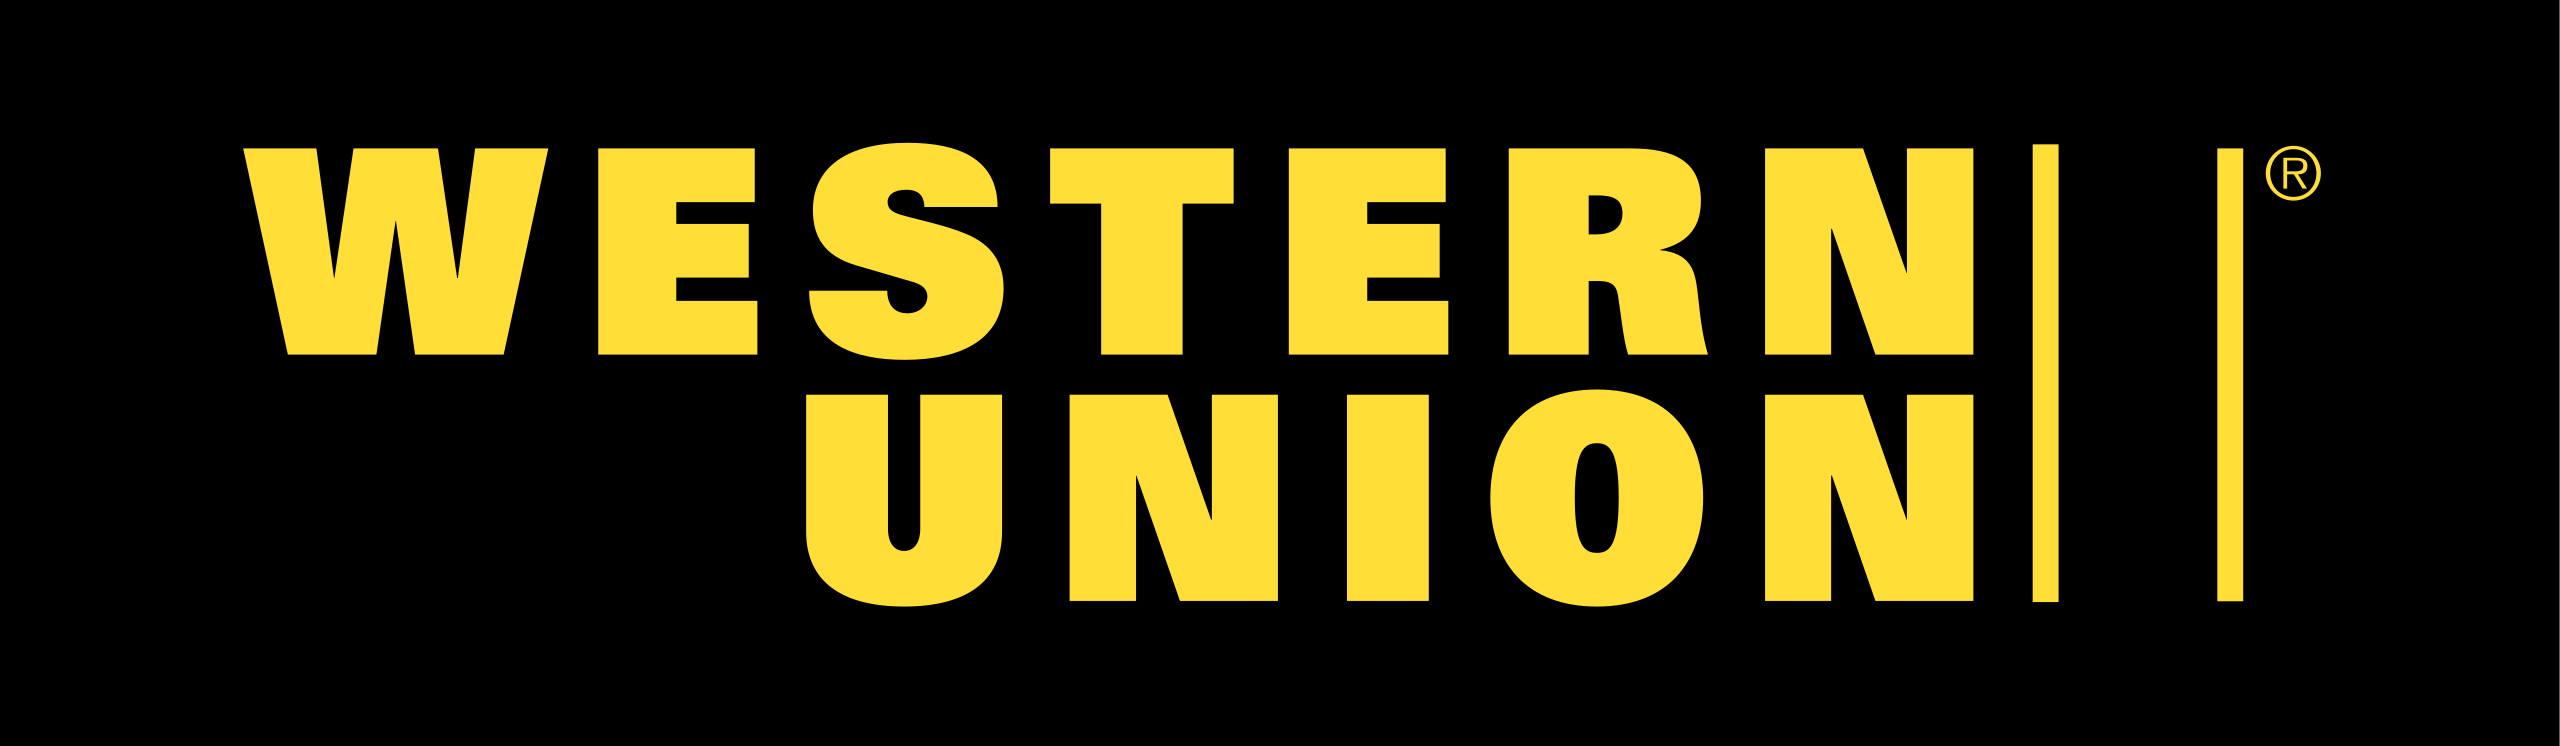 How to receive money from western union in Nigeria